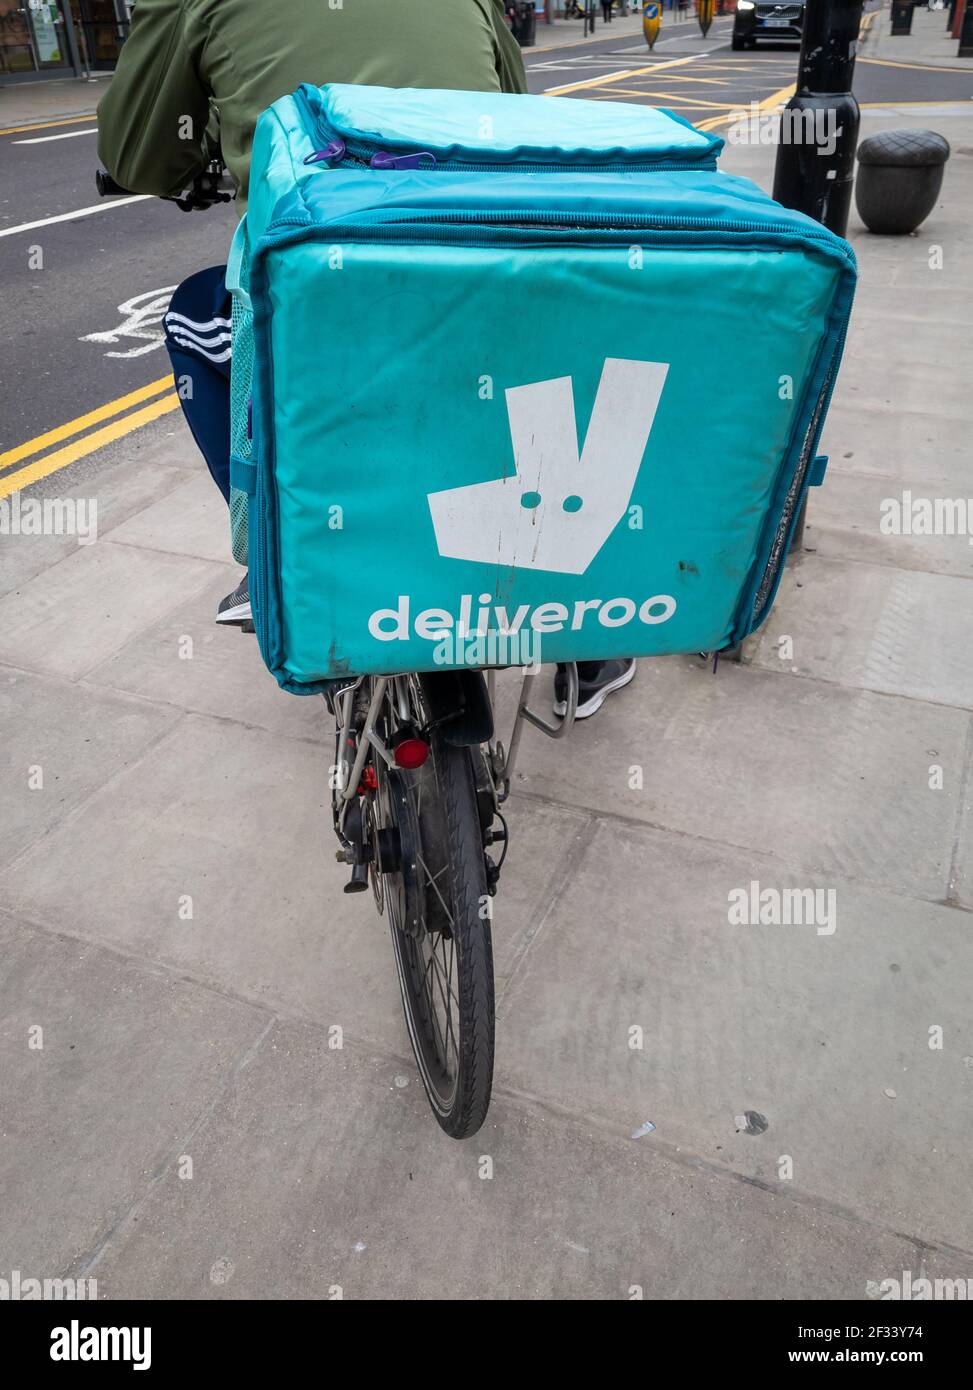 A bicycle rider working for the online home food delivery company Deliveroo. Stock Photo